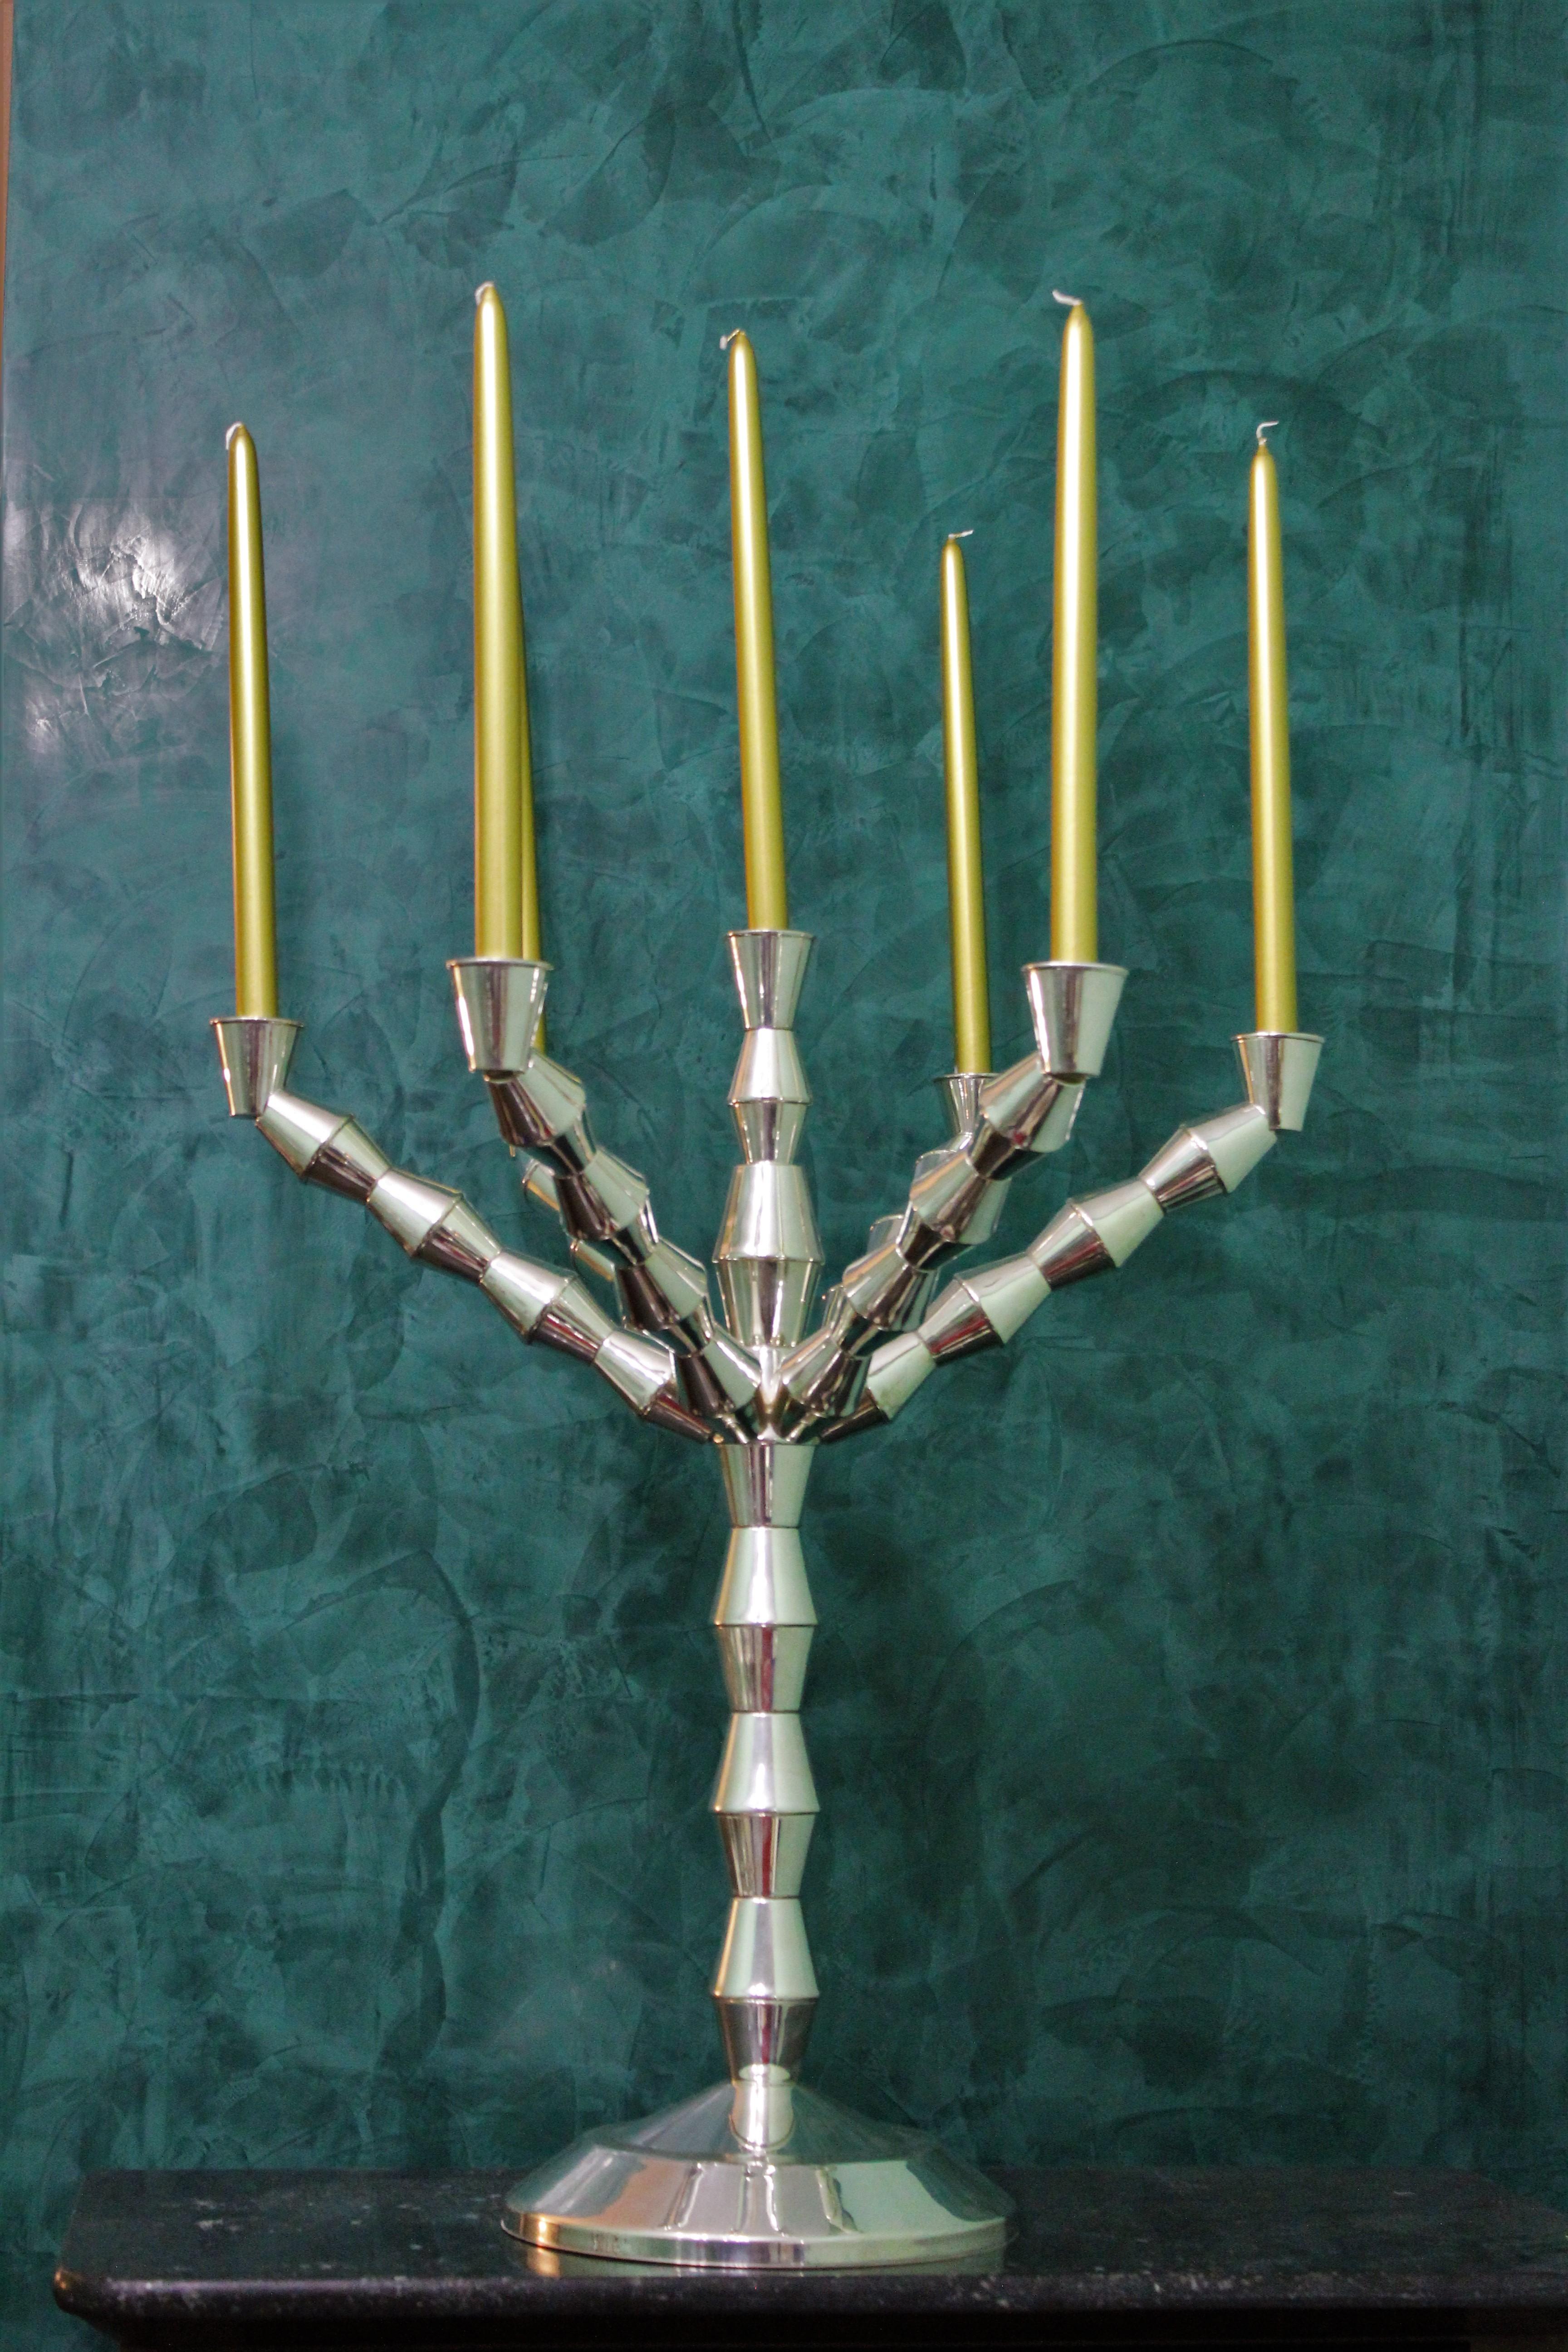 20th Century Art Deco Italian Silver Candelabras Pair by Carlo Trebbi, 1930s In Good Condition For Sale In Florence, IT